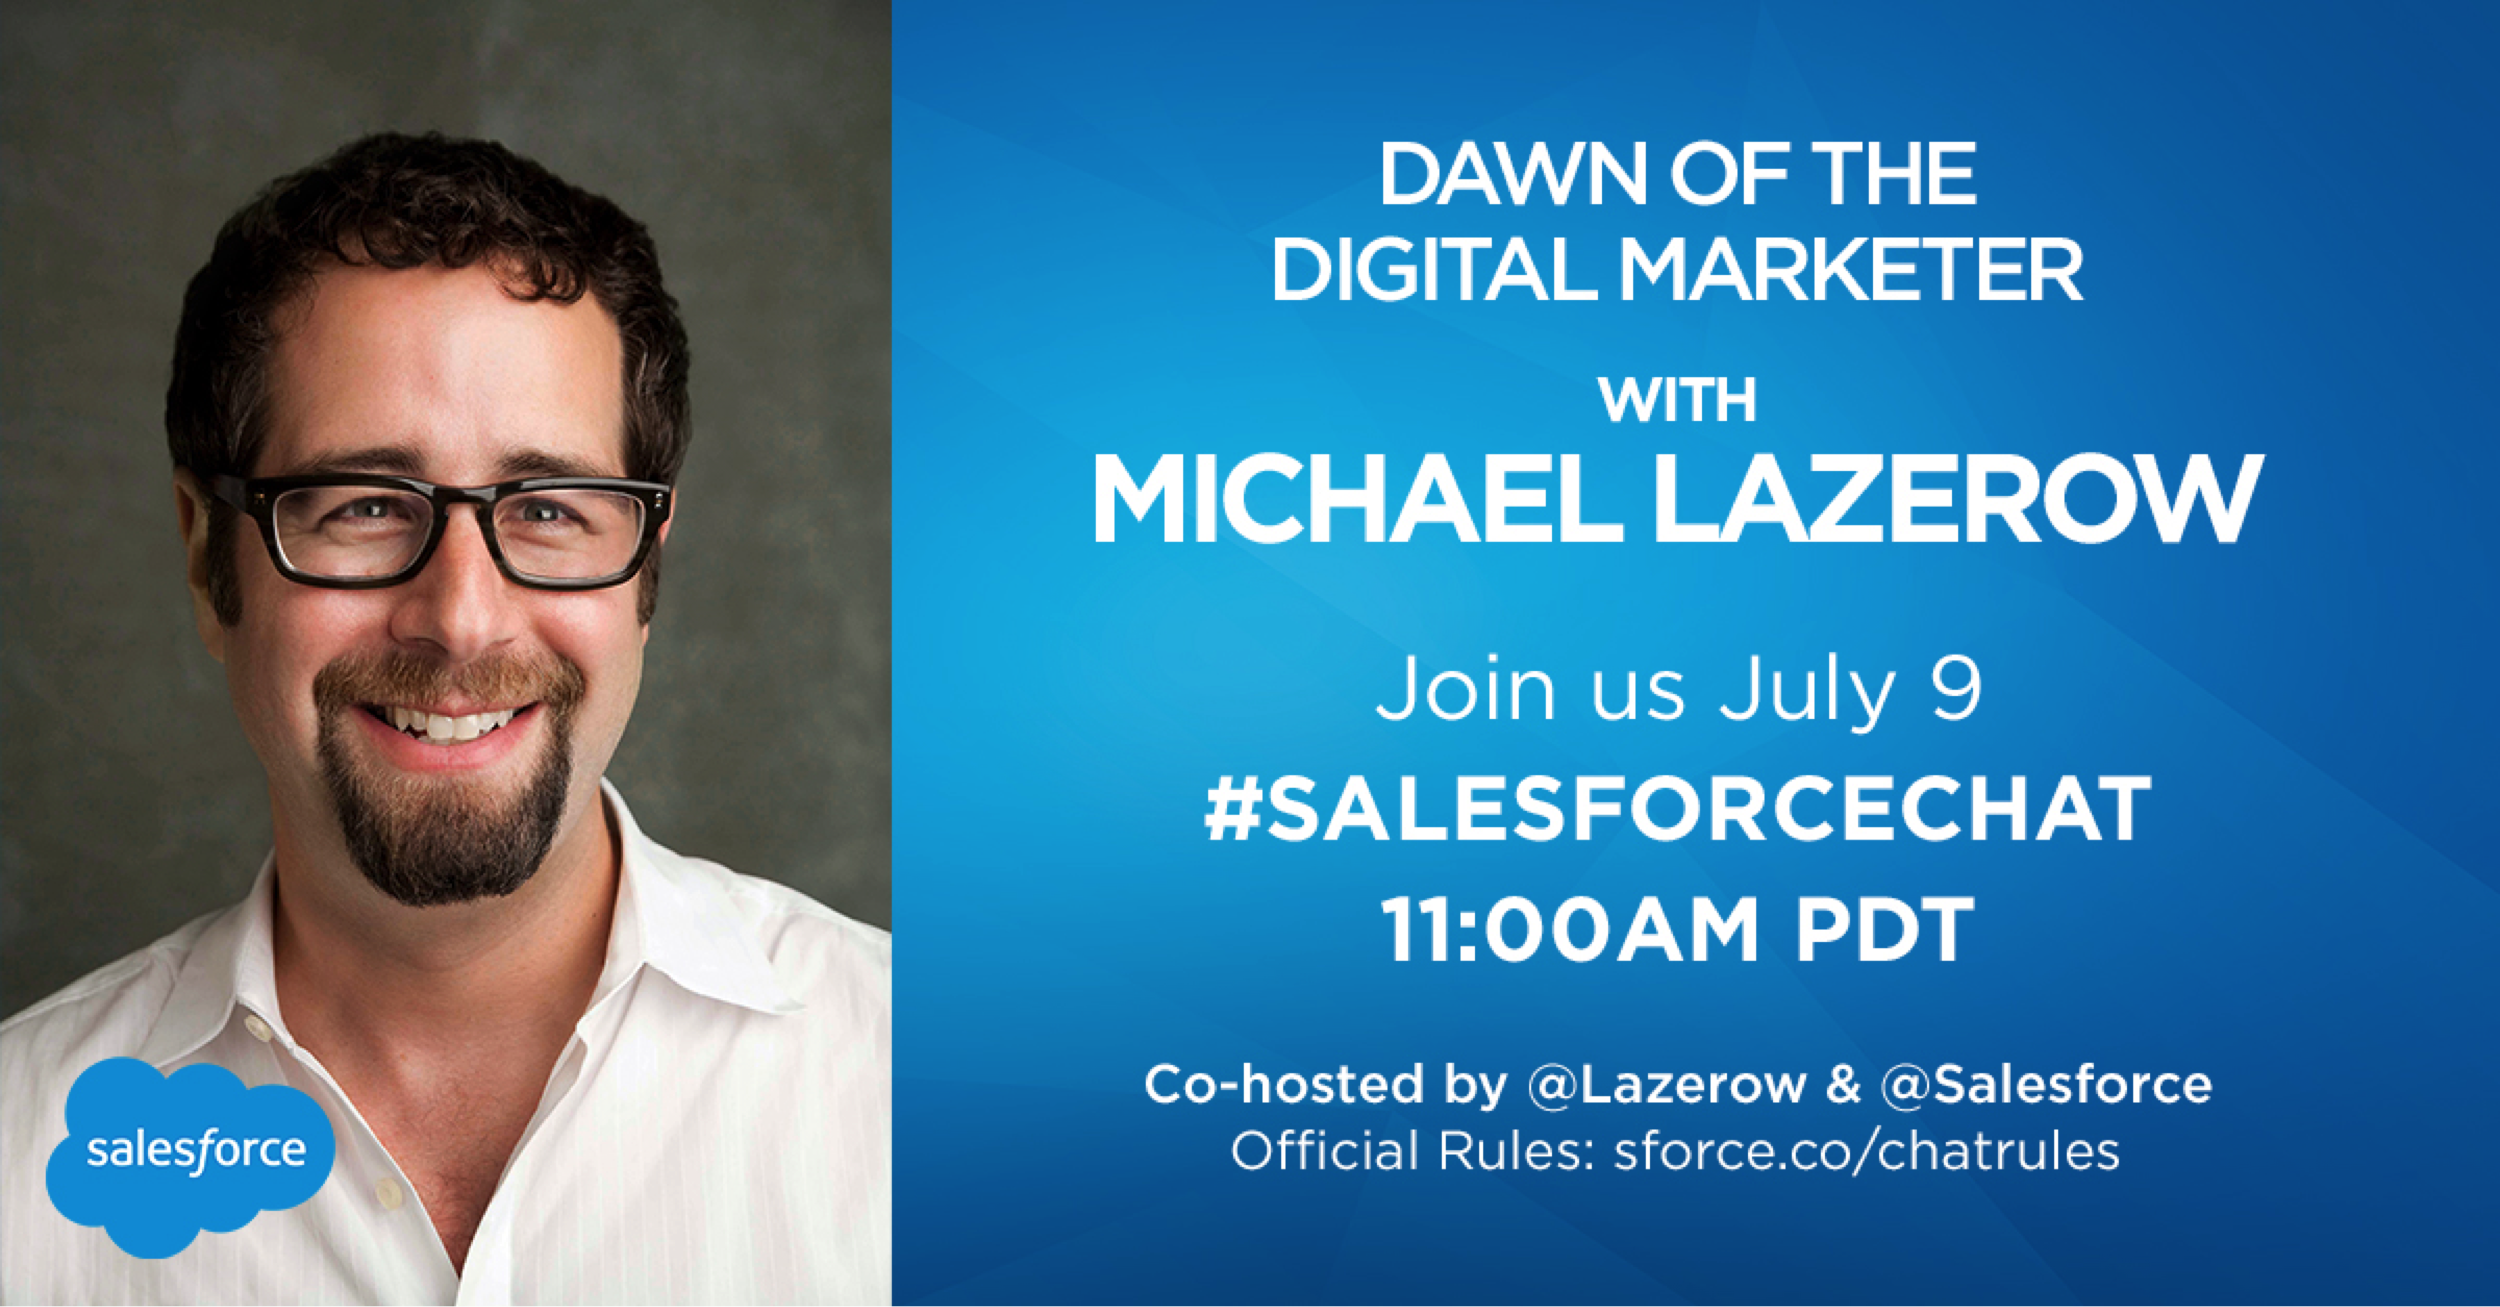 #SalesforceChat: Dawn of the Digital Marketer with Michael Lazerow